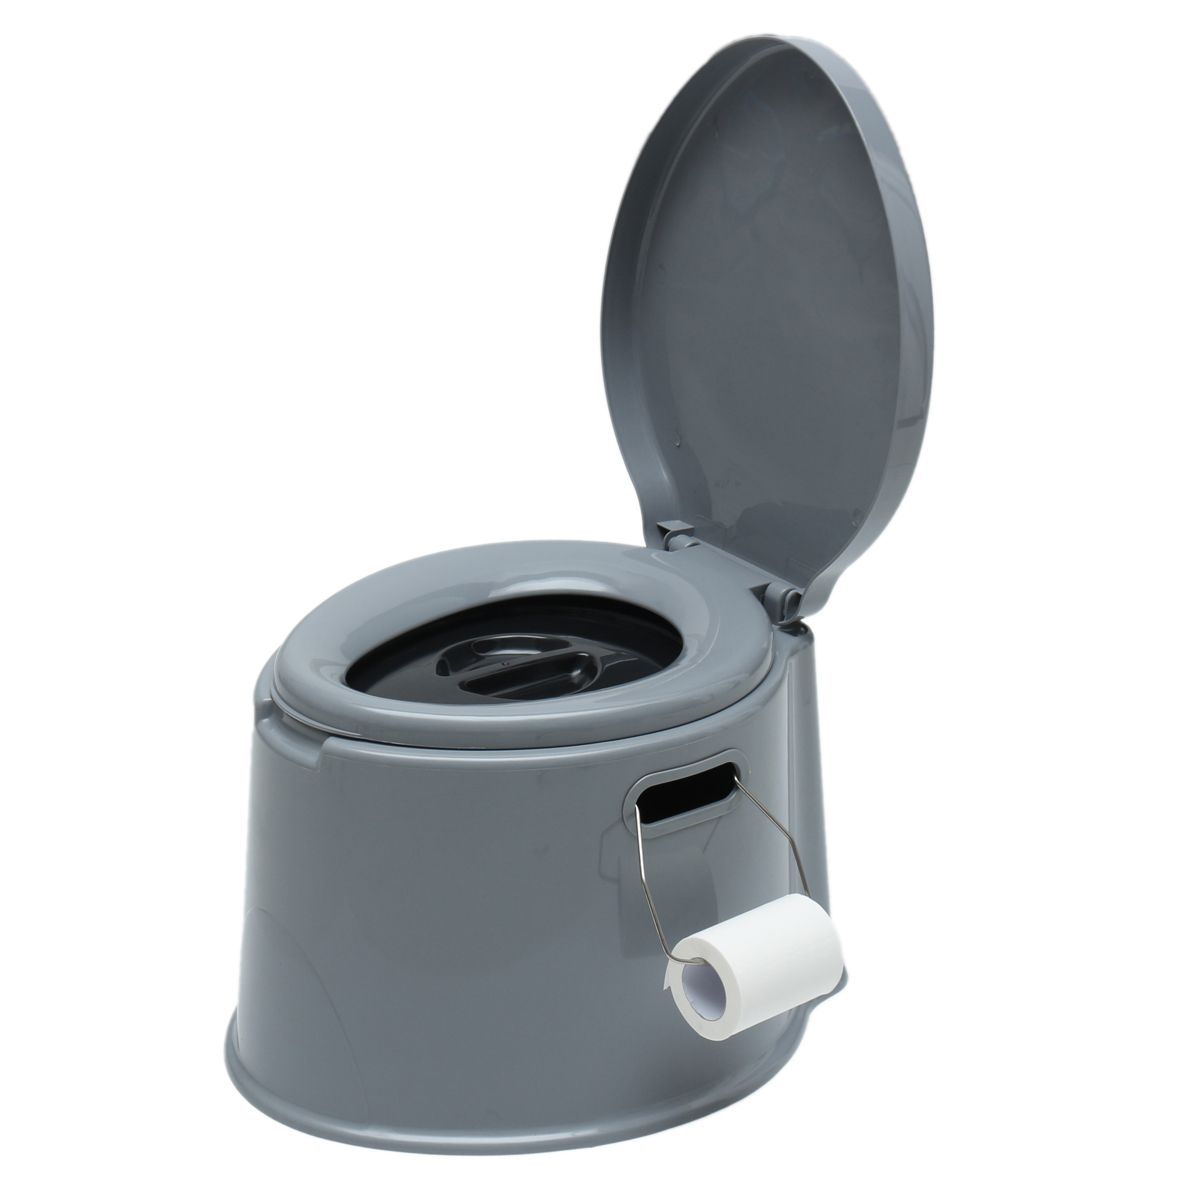 5L-Portable-Outdoor-Indoor-Travel-Camping-Toilet-Vehicle-Potty-Commode-Garden-1562218